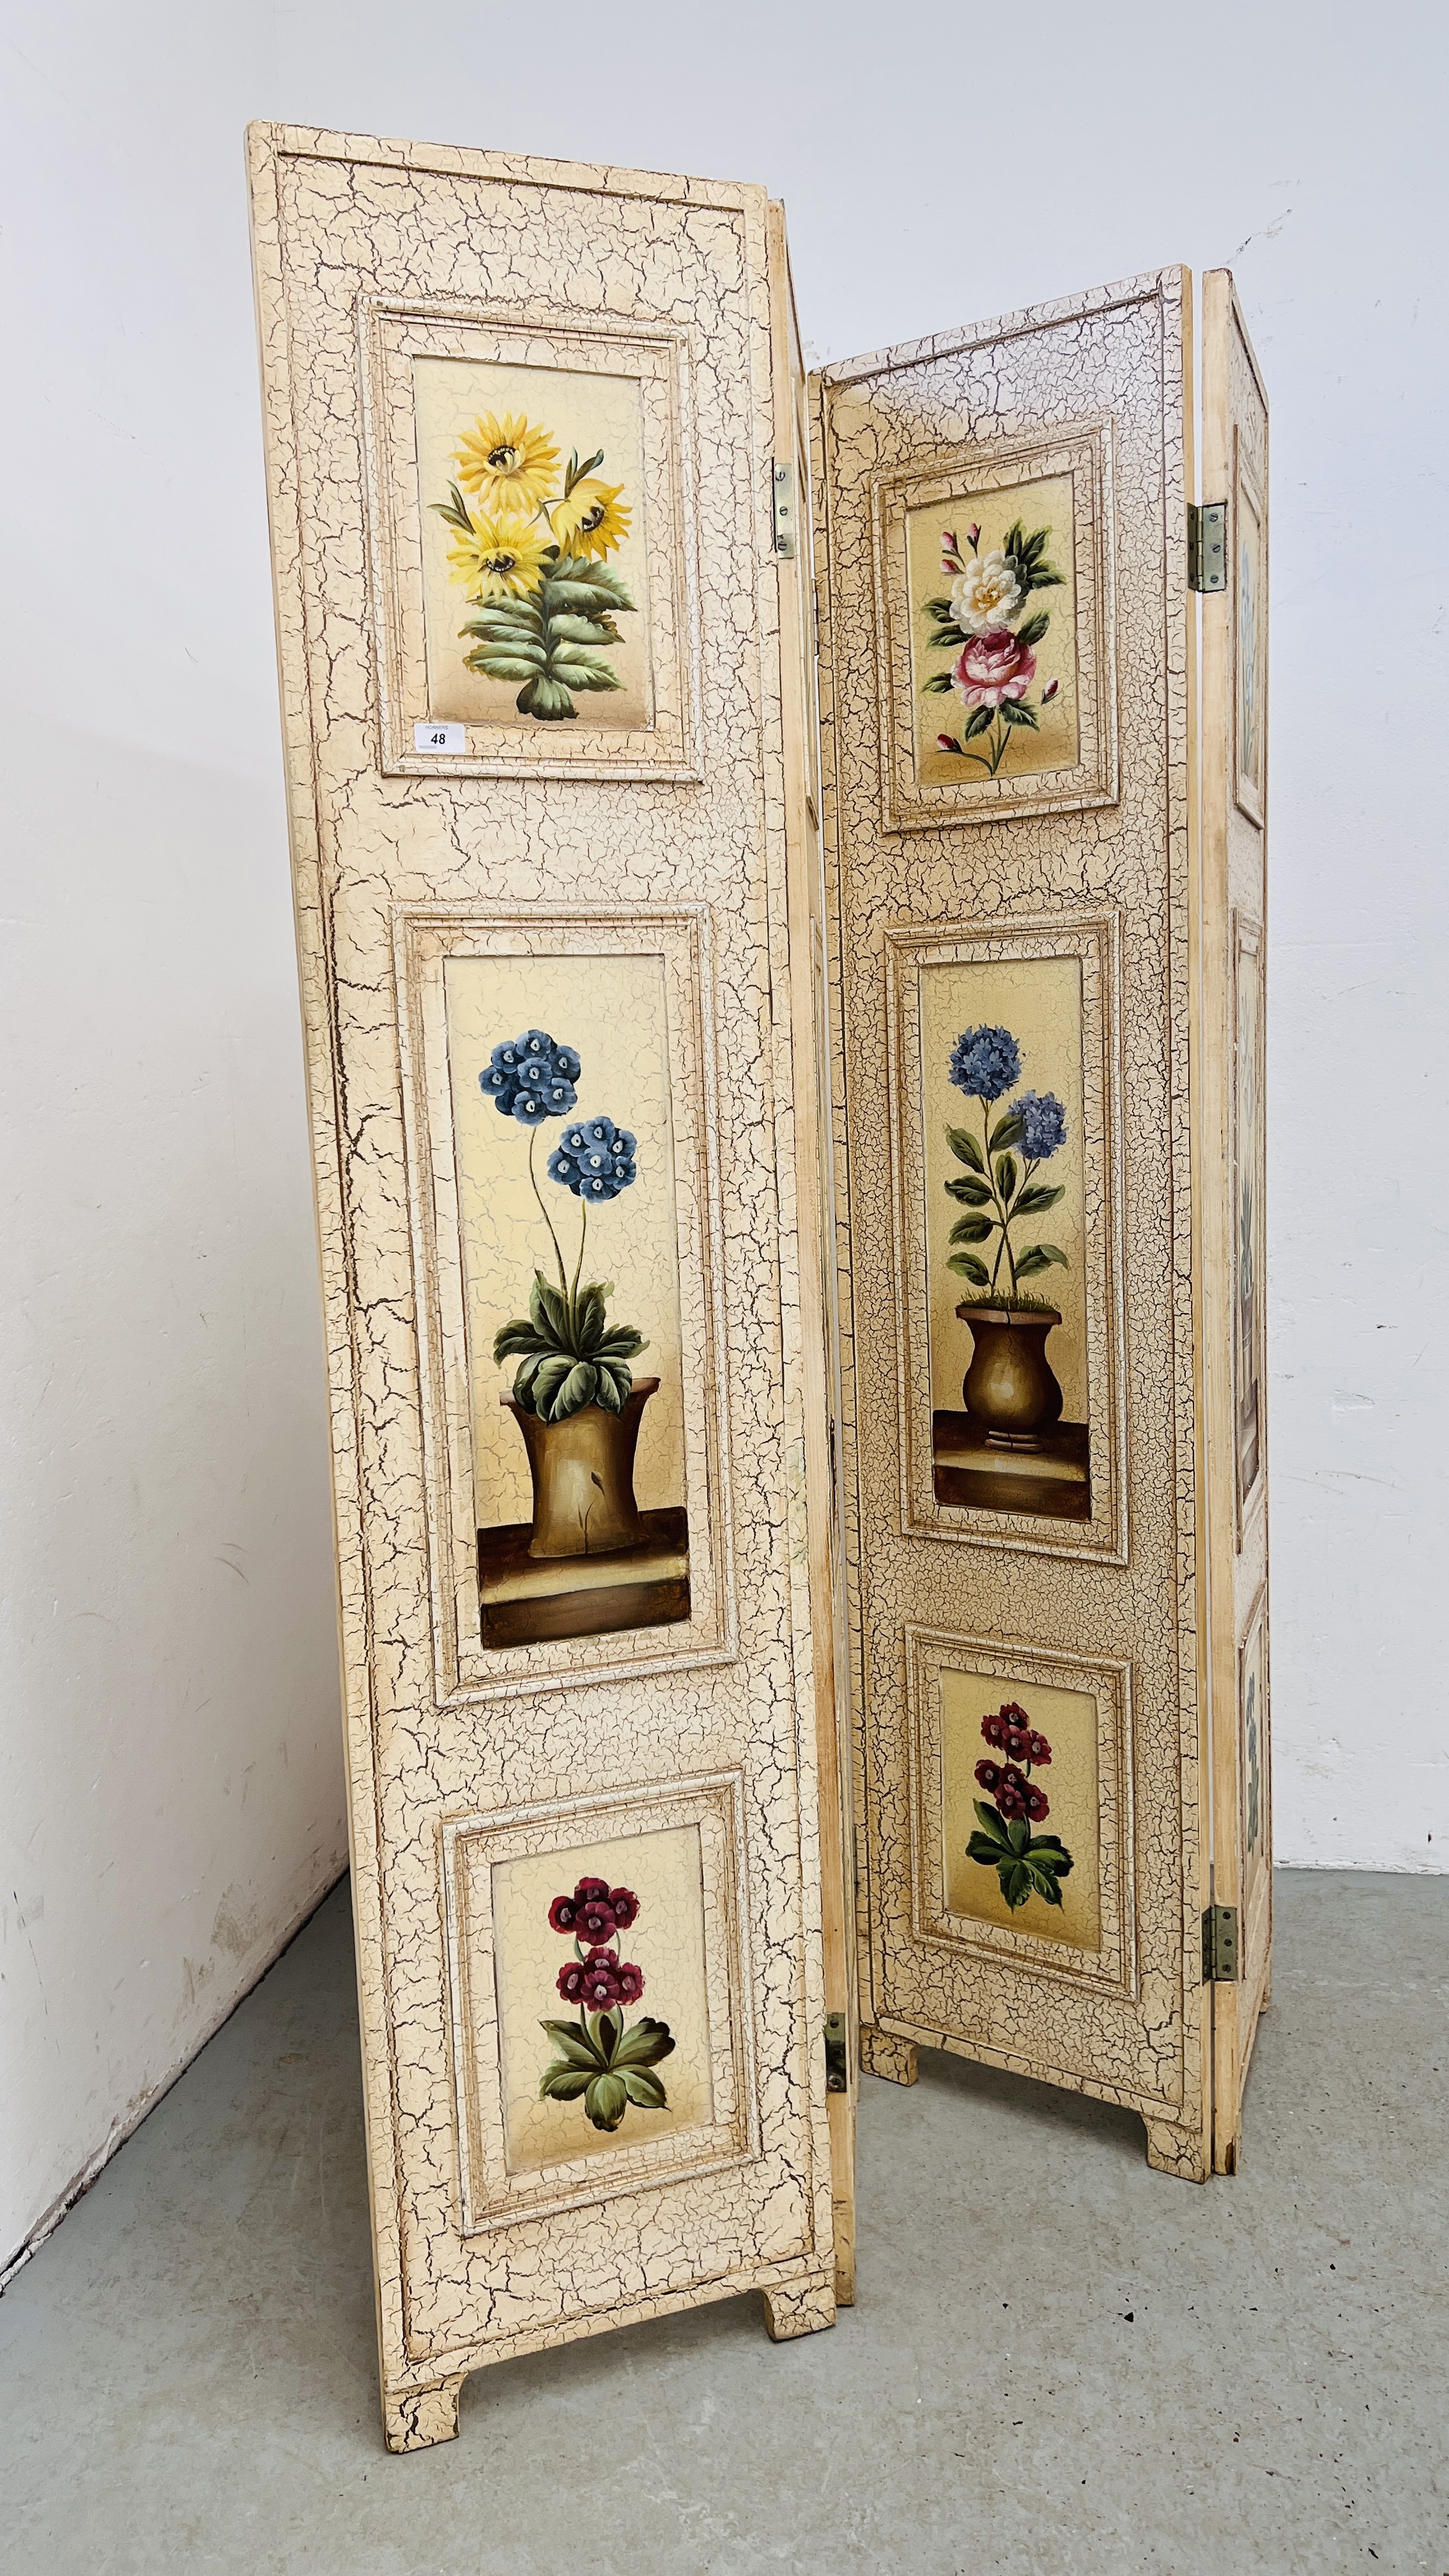 A FOUR FOLD SCREEN DECORATED WITH HAND PAINTED STILL LIFE EACH SECTION 180CM. X 40CM. - Image 2 of 6